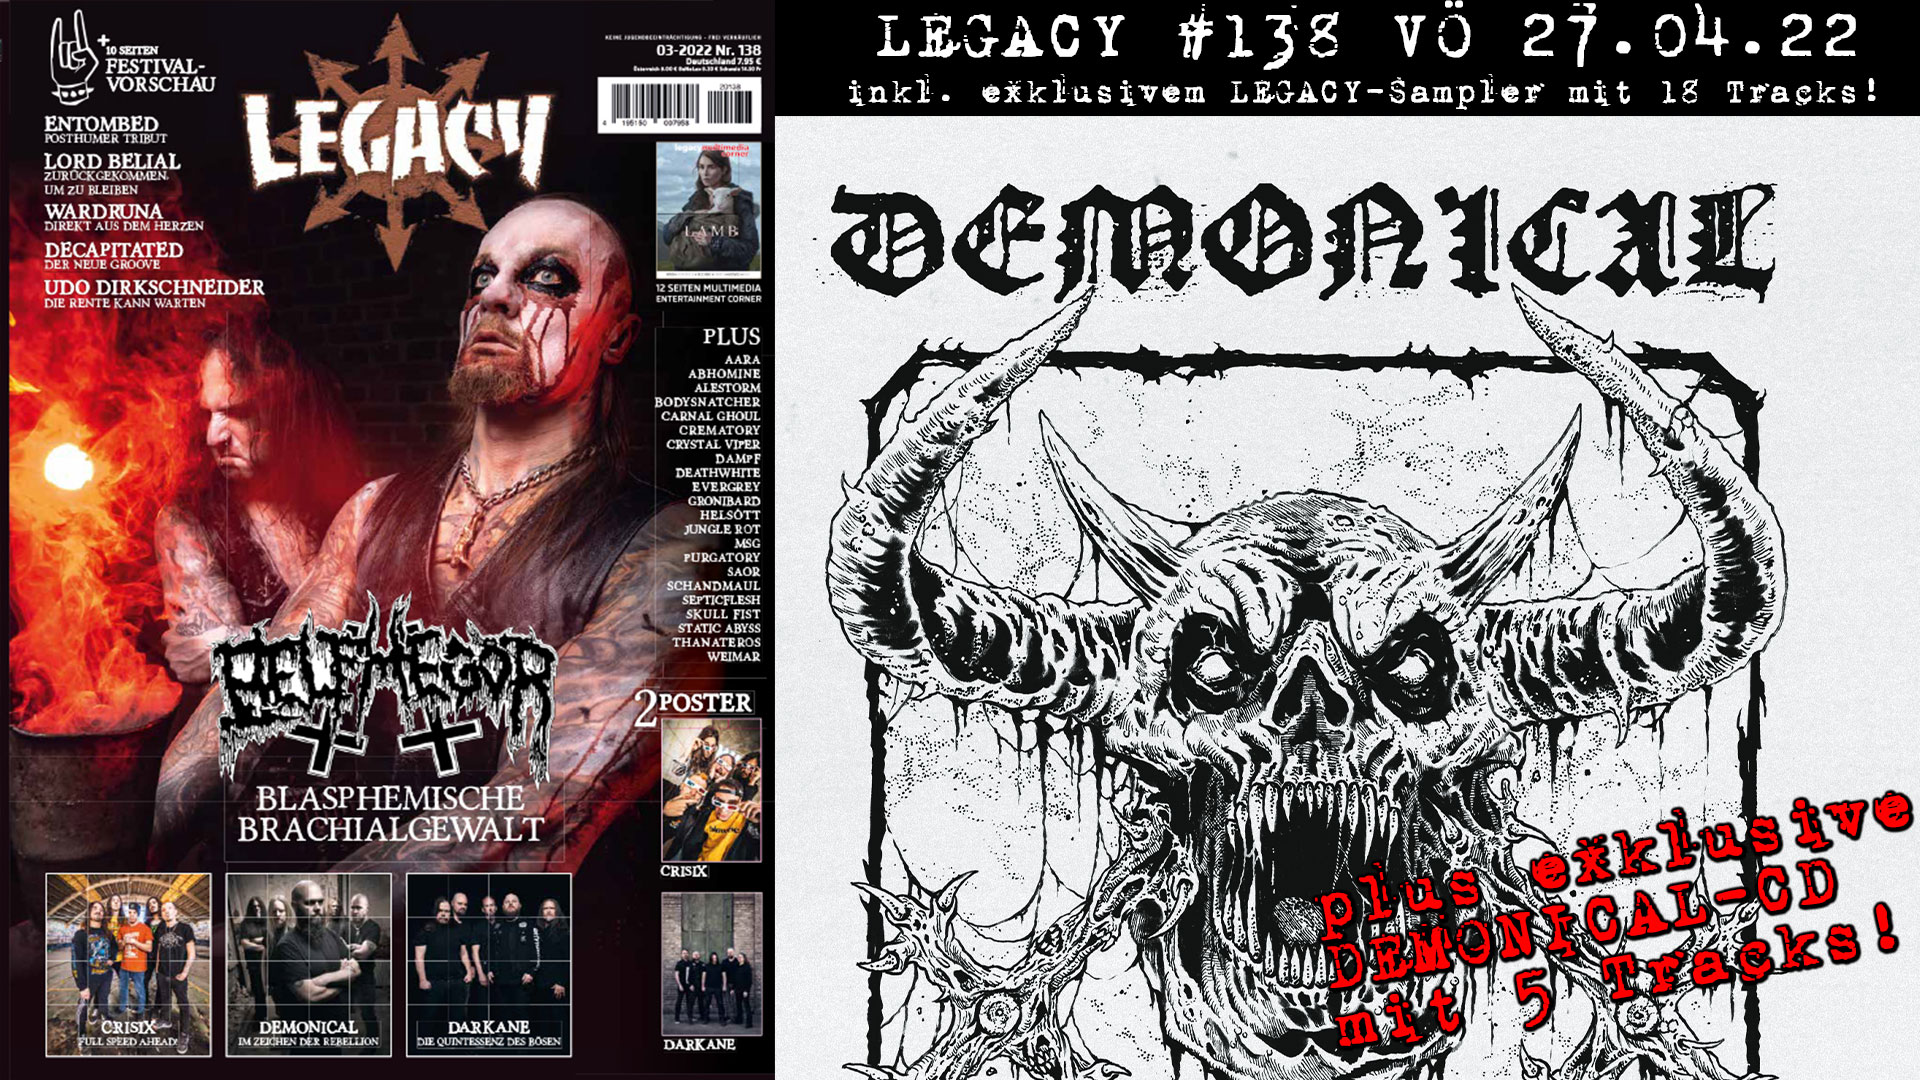 LEGACY #138 out 27.04.2022